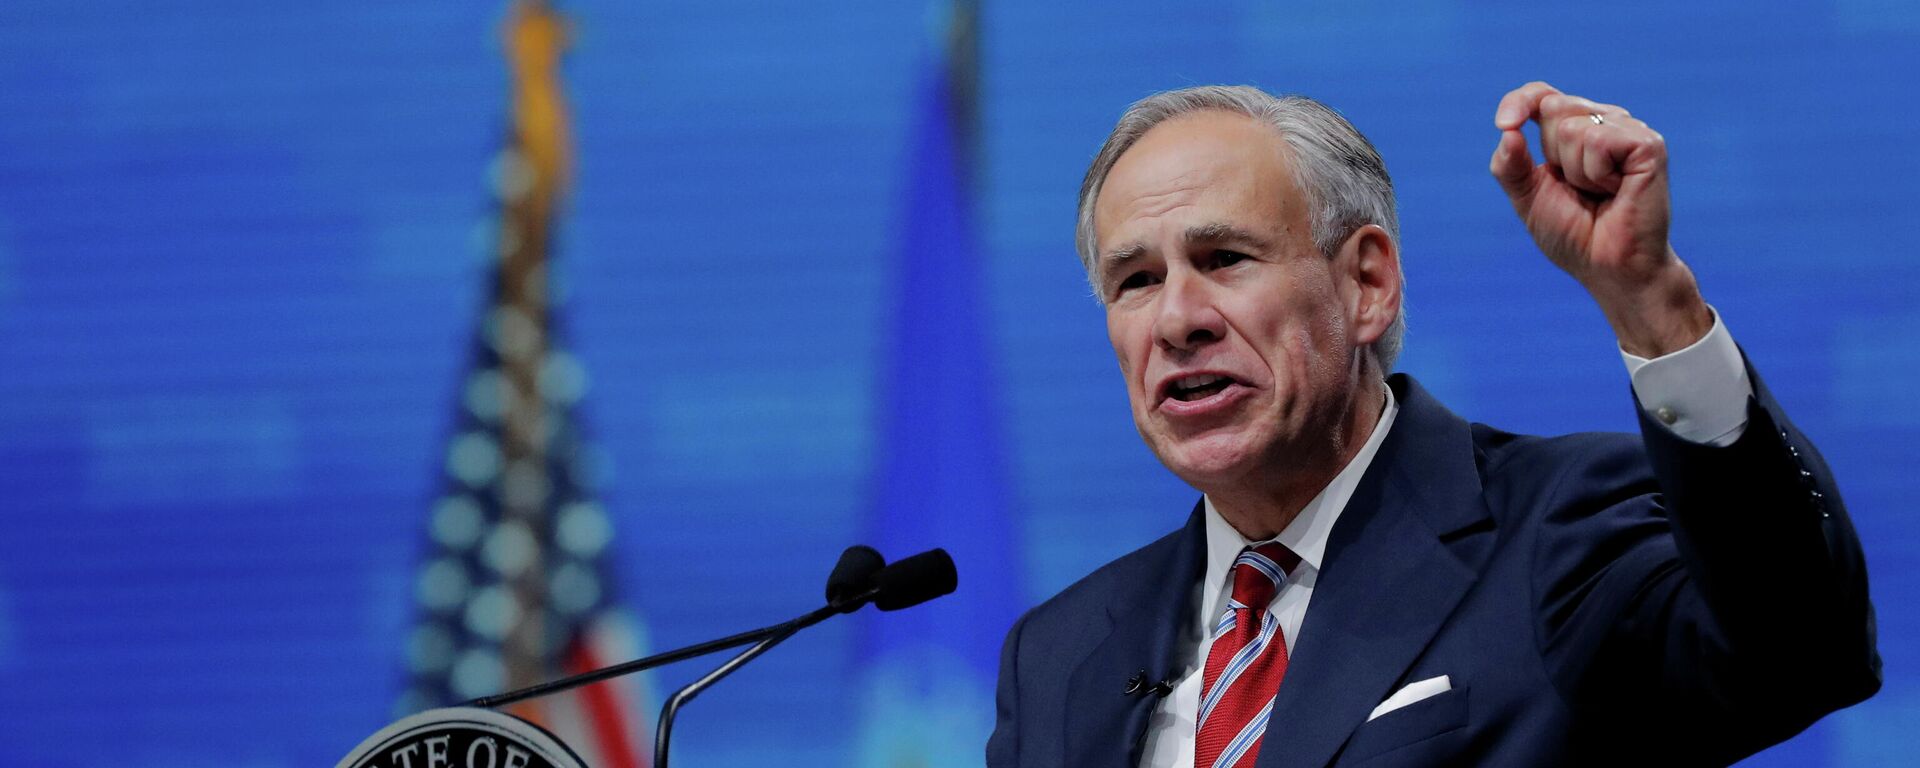 Texas Governor Greg Abbott speaks at the annual National Rifle Association (NRA) convention in Dallas, Texas, U.S., May 4, 2018. - Sputnik International, 1920, 16.10.2021